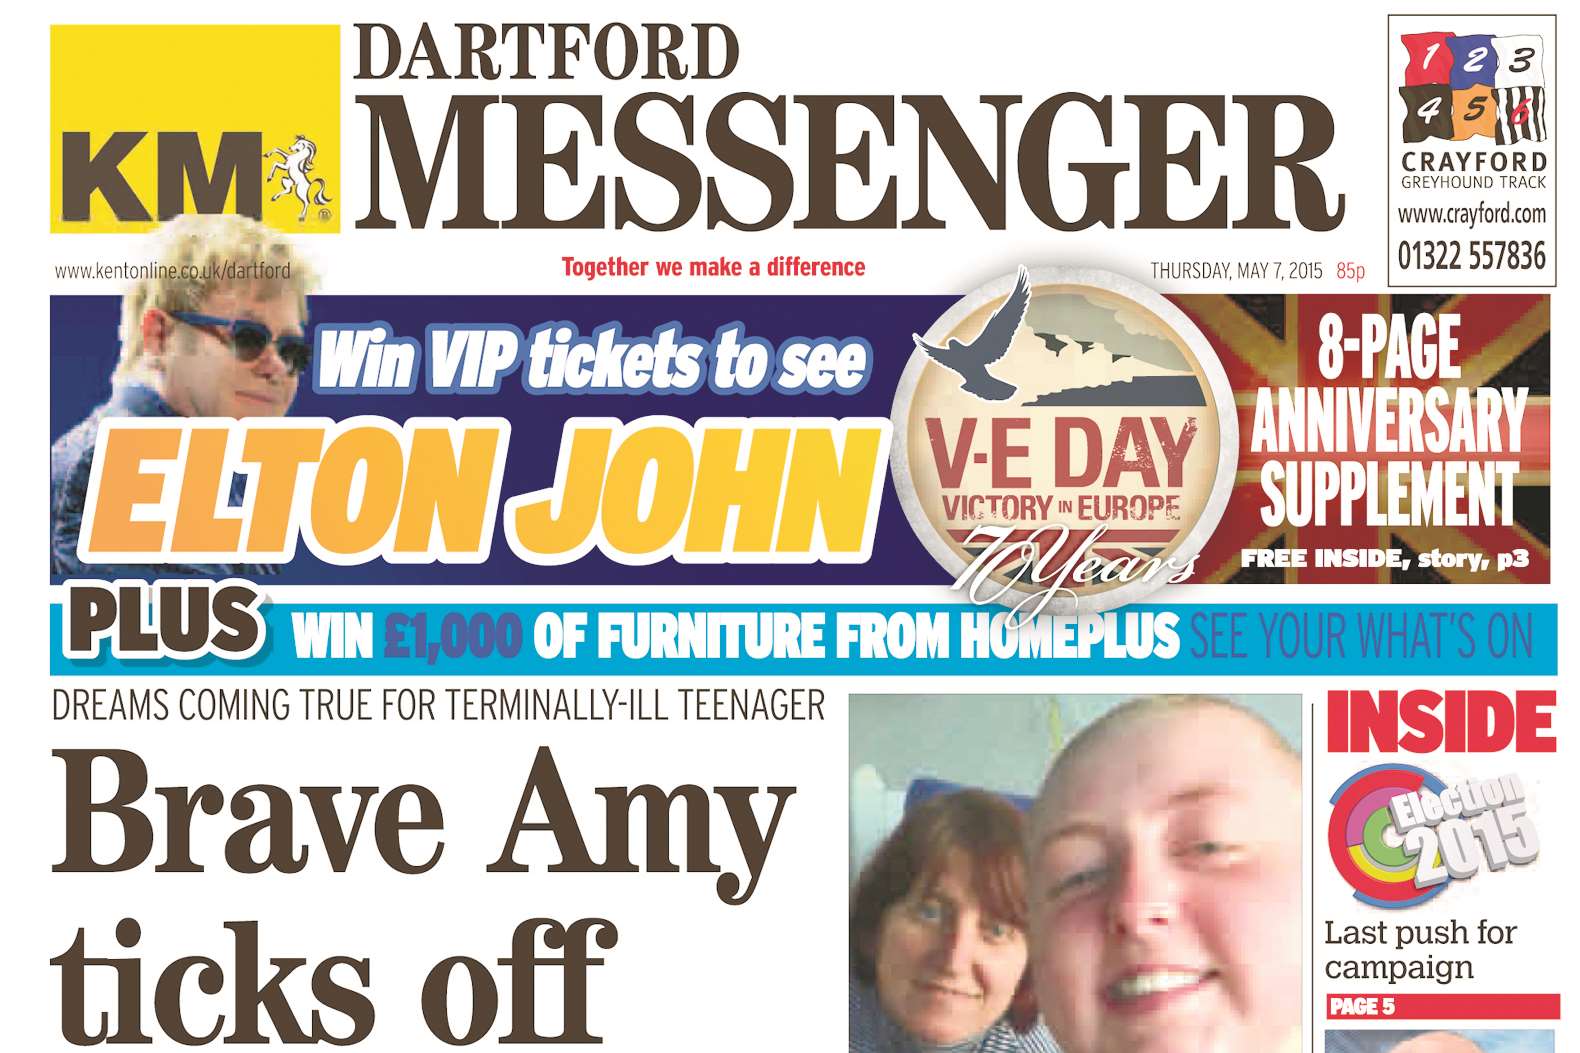 Amy's story on the front of the Dartford Messenger